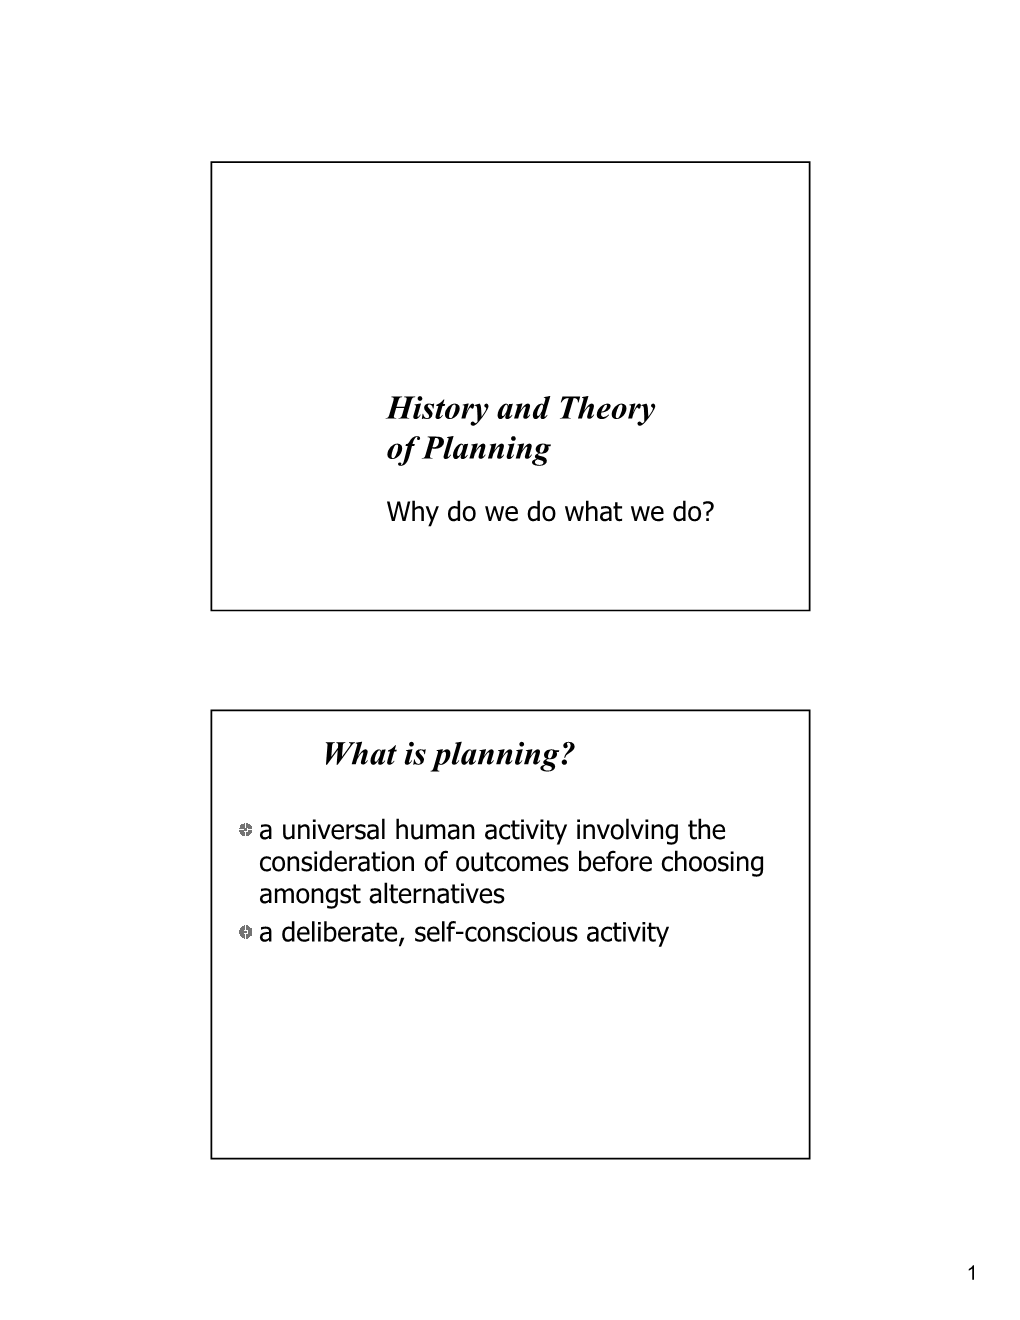 History and Theory of Planning